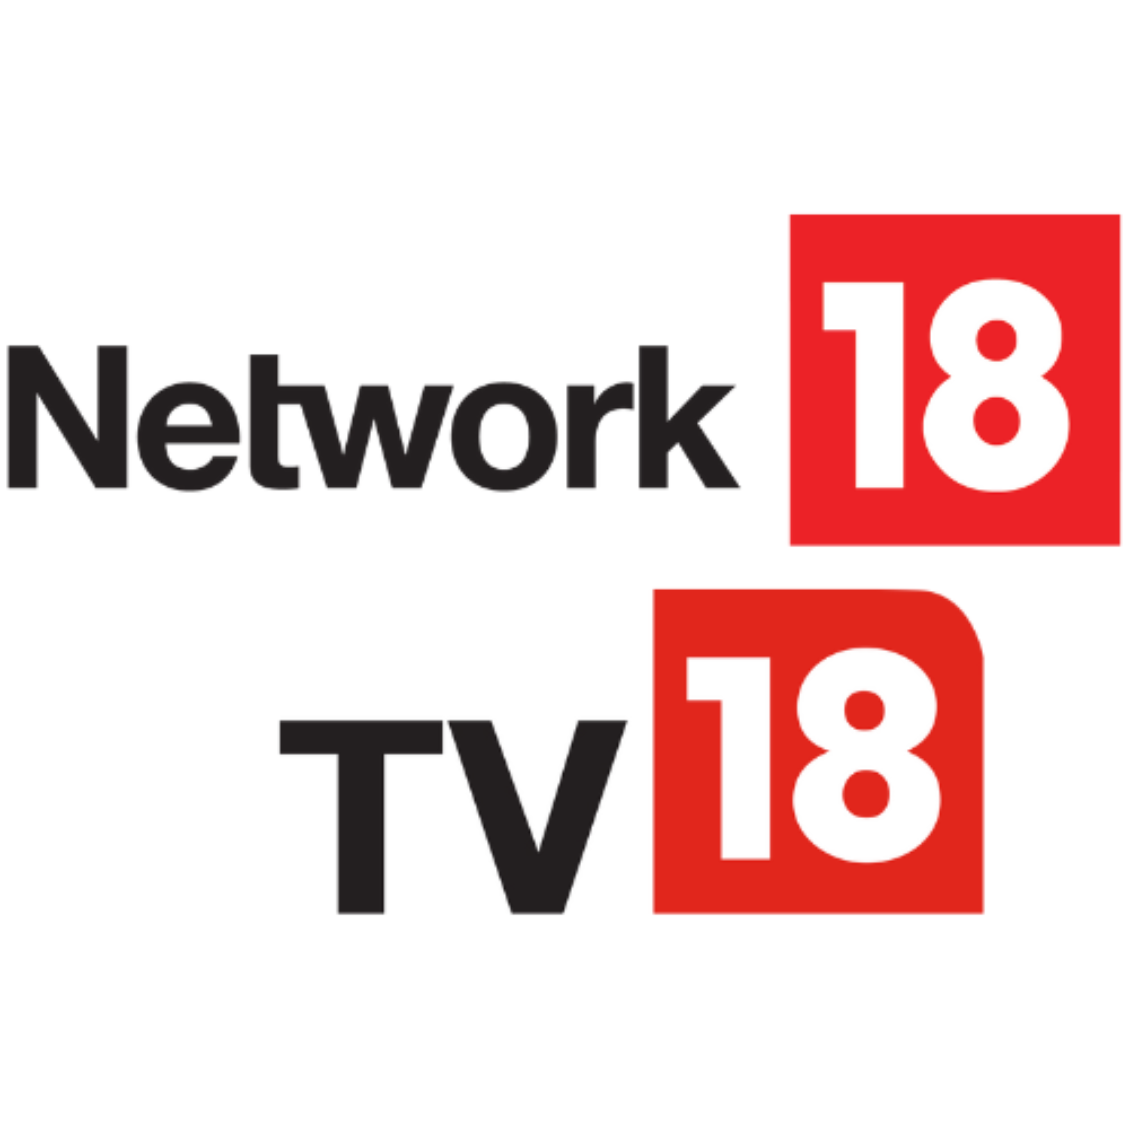 The Network 18 - TV18 